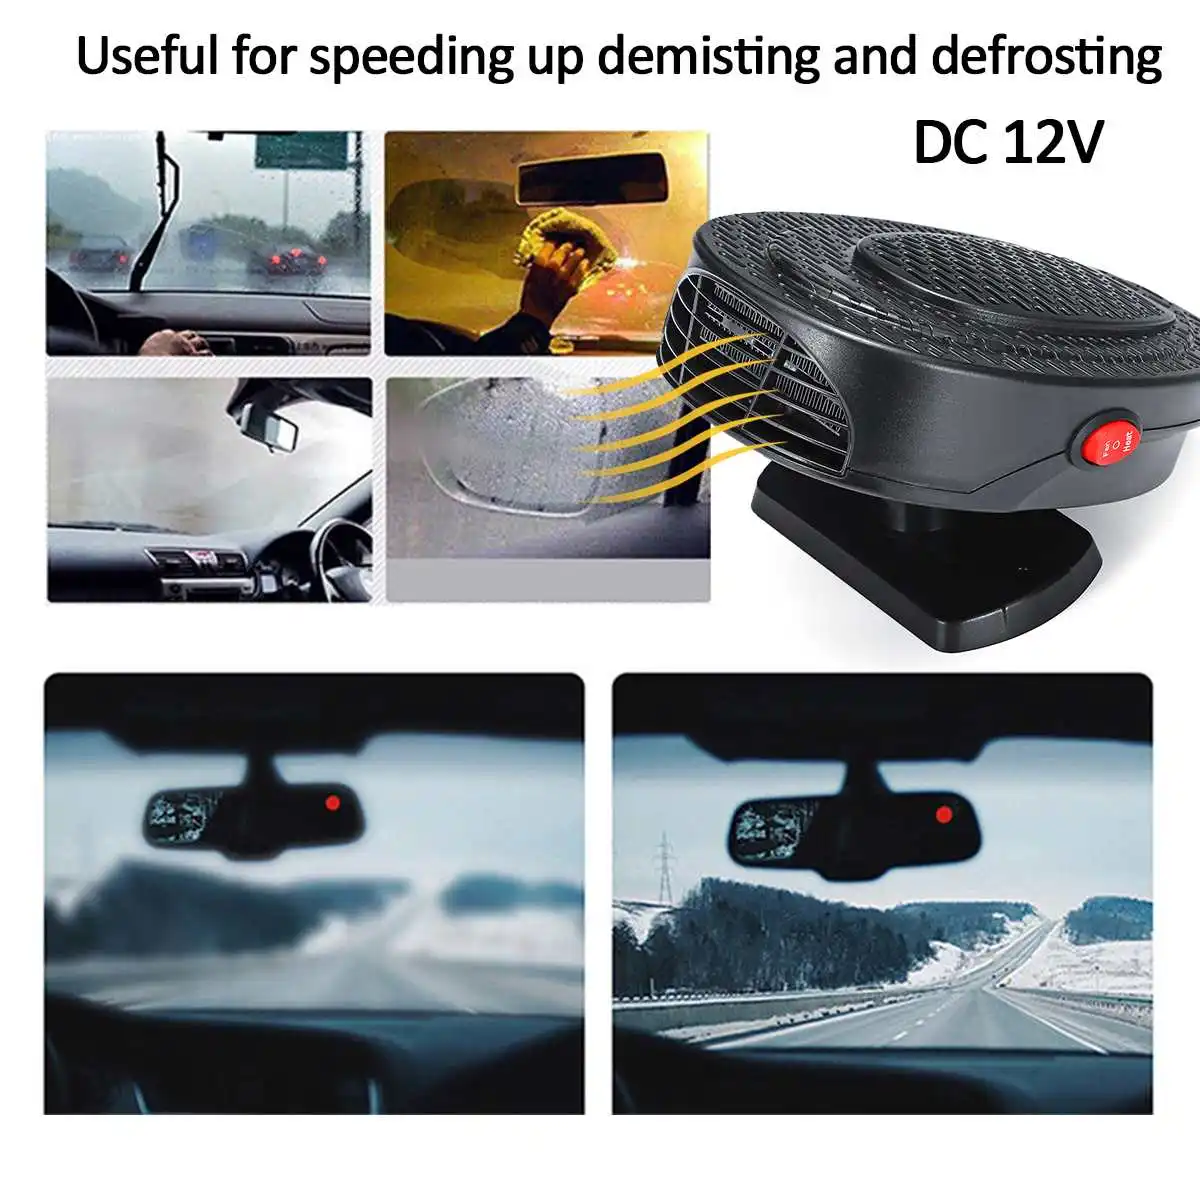 Portable Adjustable Car Heaters Combo Car Interior Heaters Windshield Defroster Defogger Four Seasons Universals Heating Air